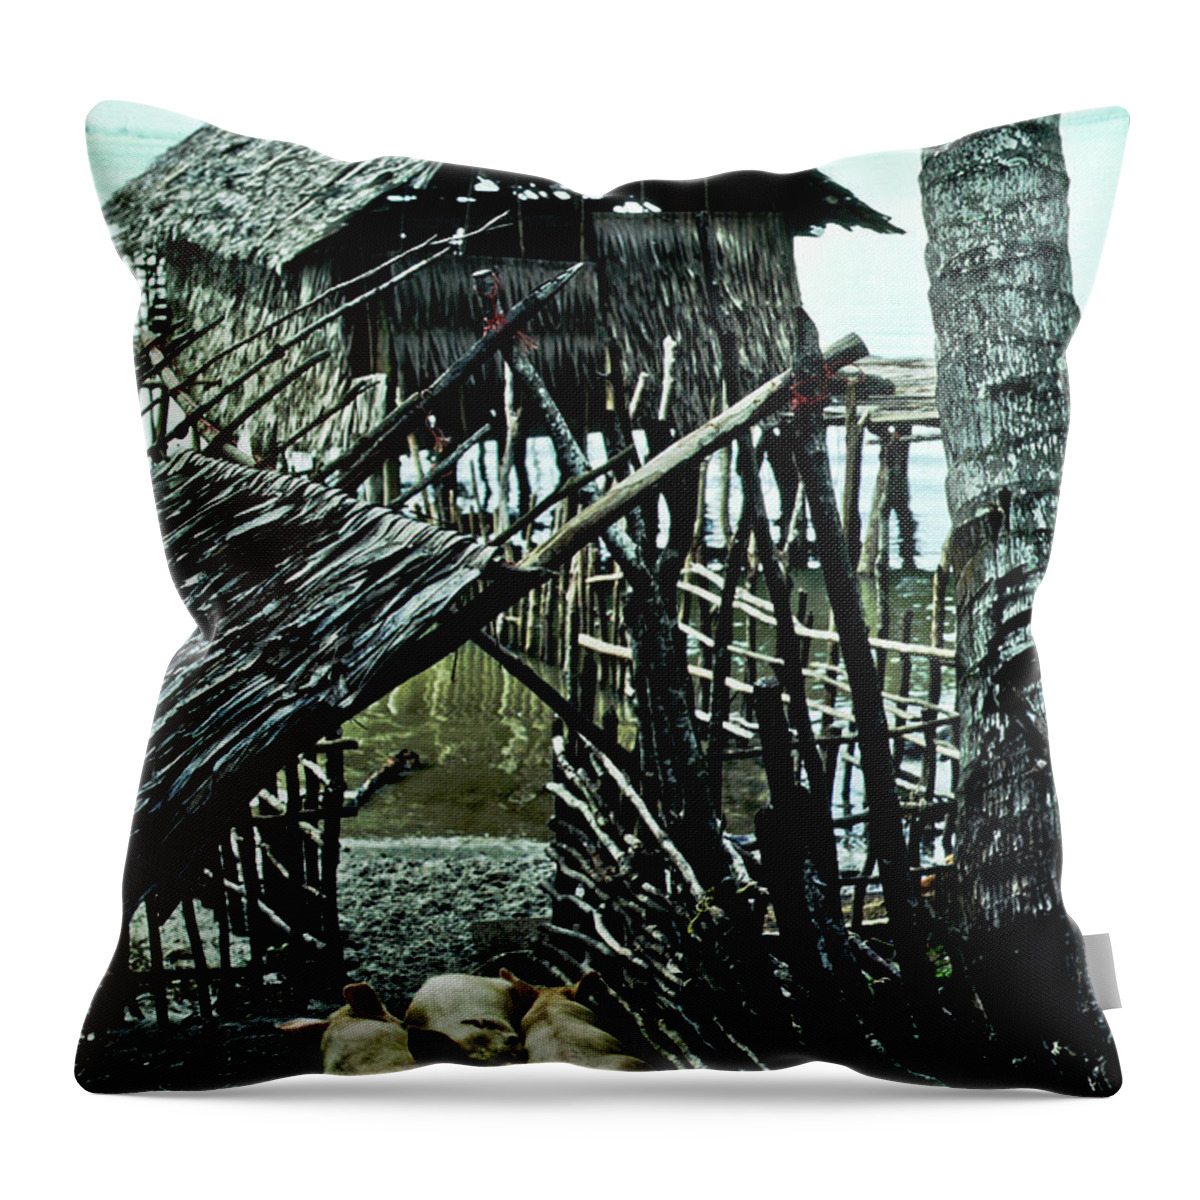 Pigs Livestock Shack Throw Pillow featuring the photograph Livestock Waiting by Neil Pankler